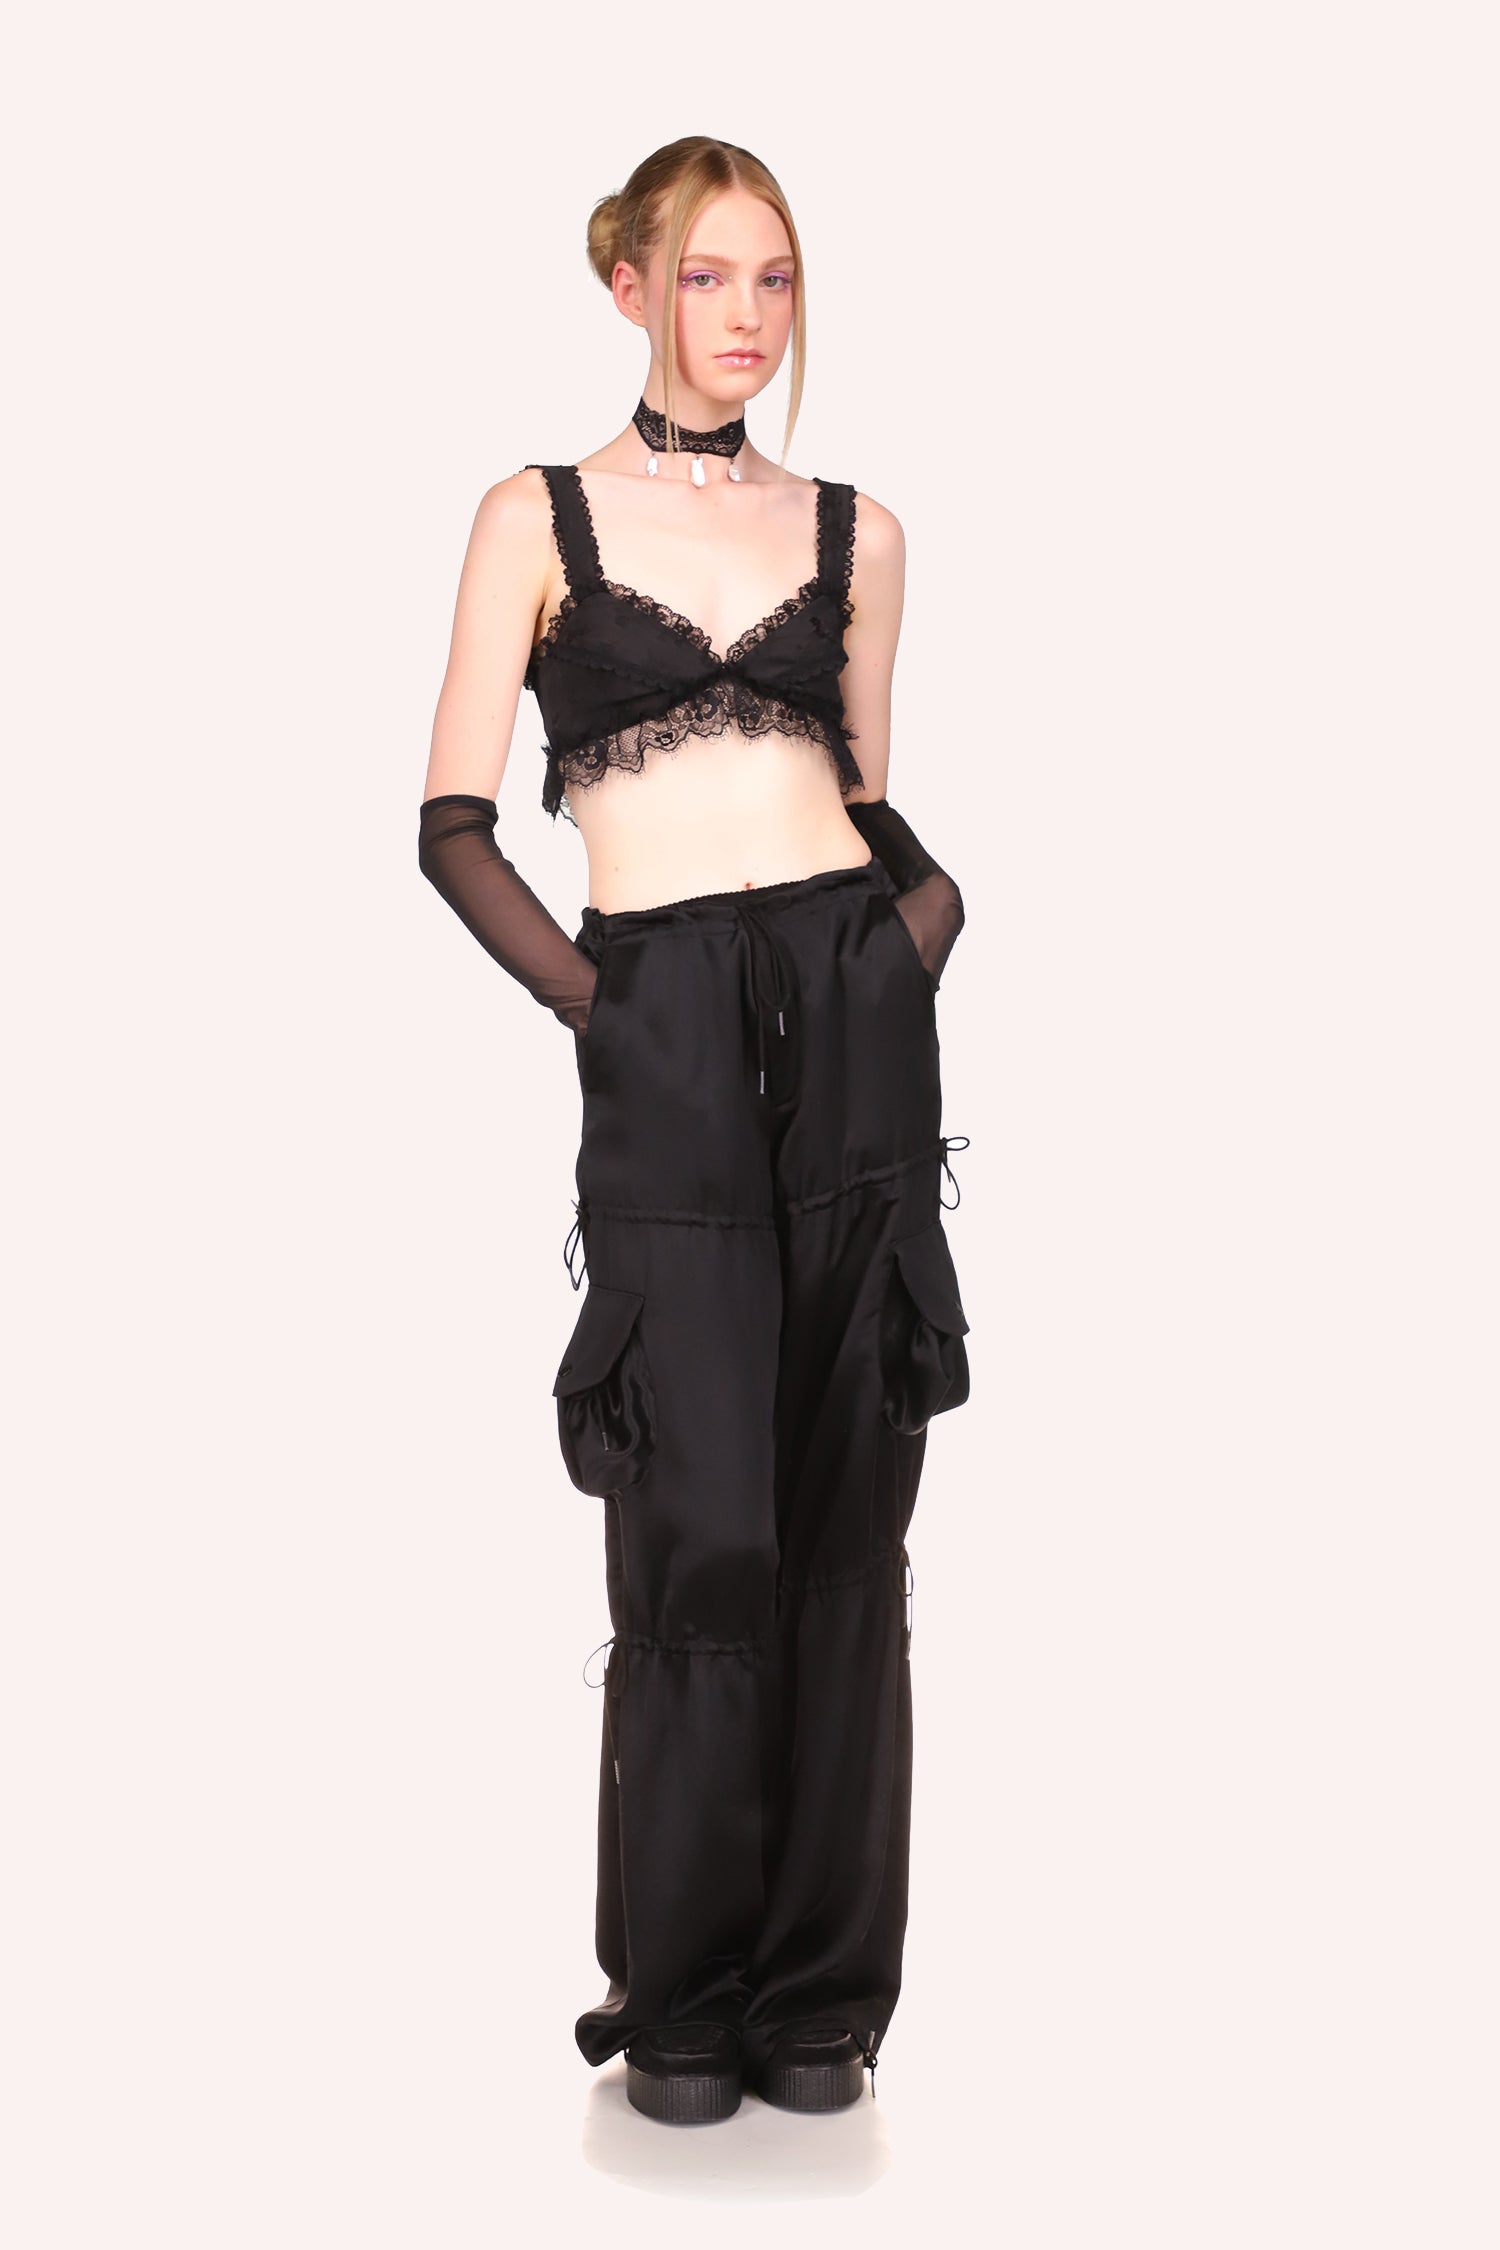 The black color combined with the elegant lace hem and cute black straps make this bralette a must-have for any occasion